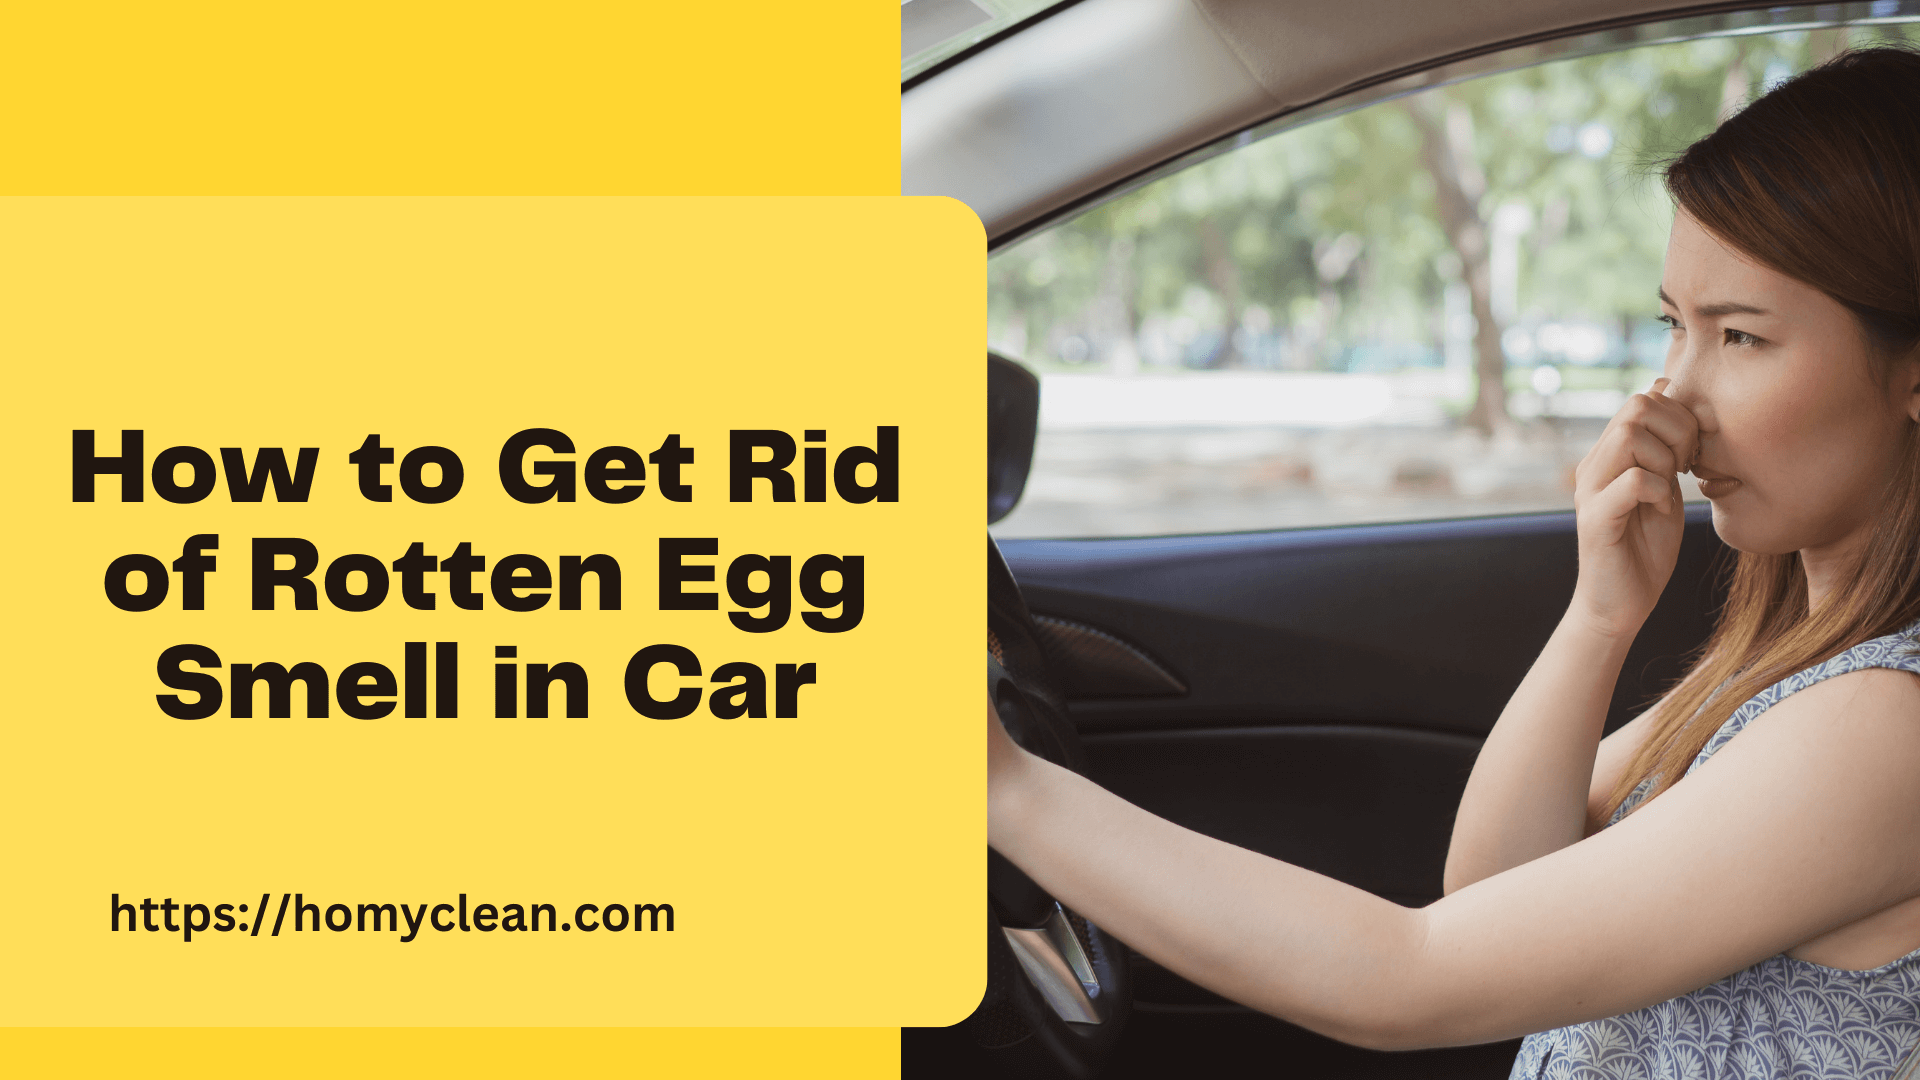 How to Get Rid of Rotten Egg Smell in Car